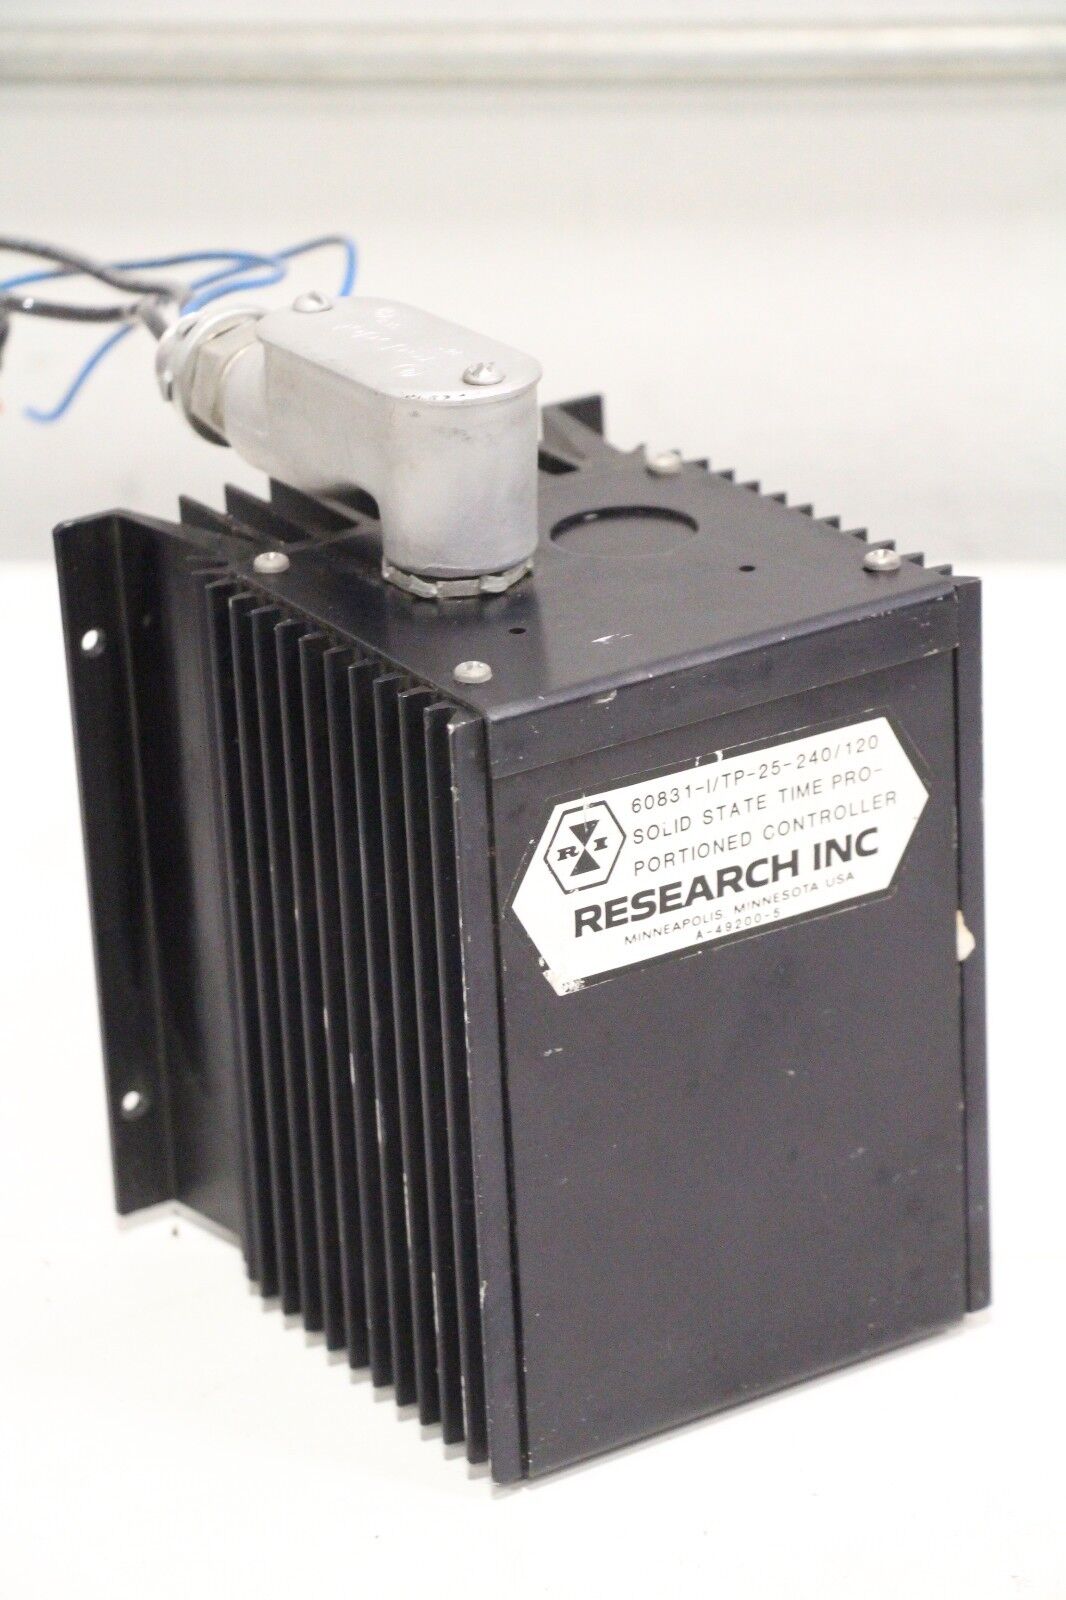 Research Inc Solid State Time ProPortioned Controller 60831-I/TP-25-240/120 